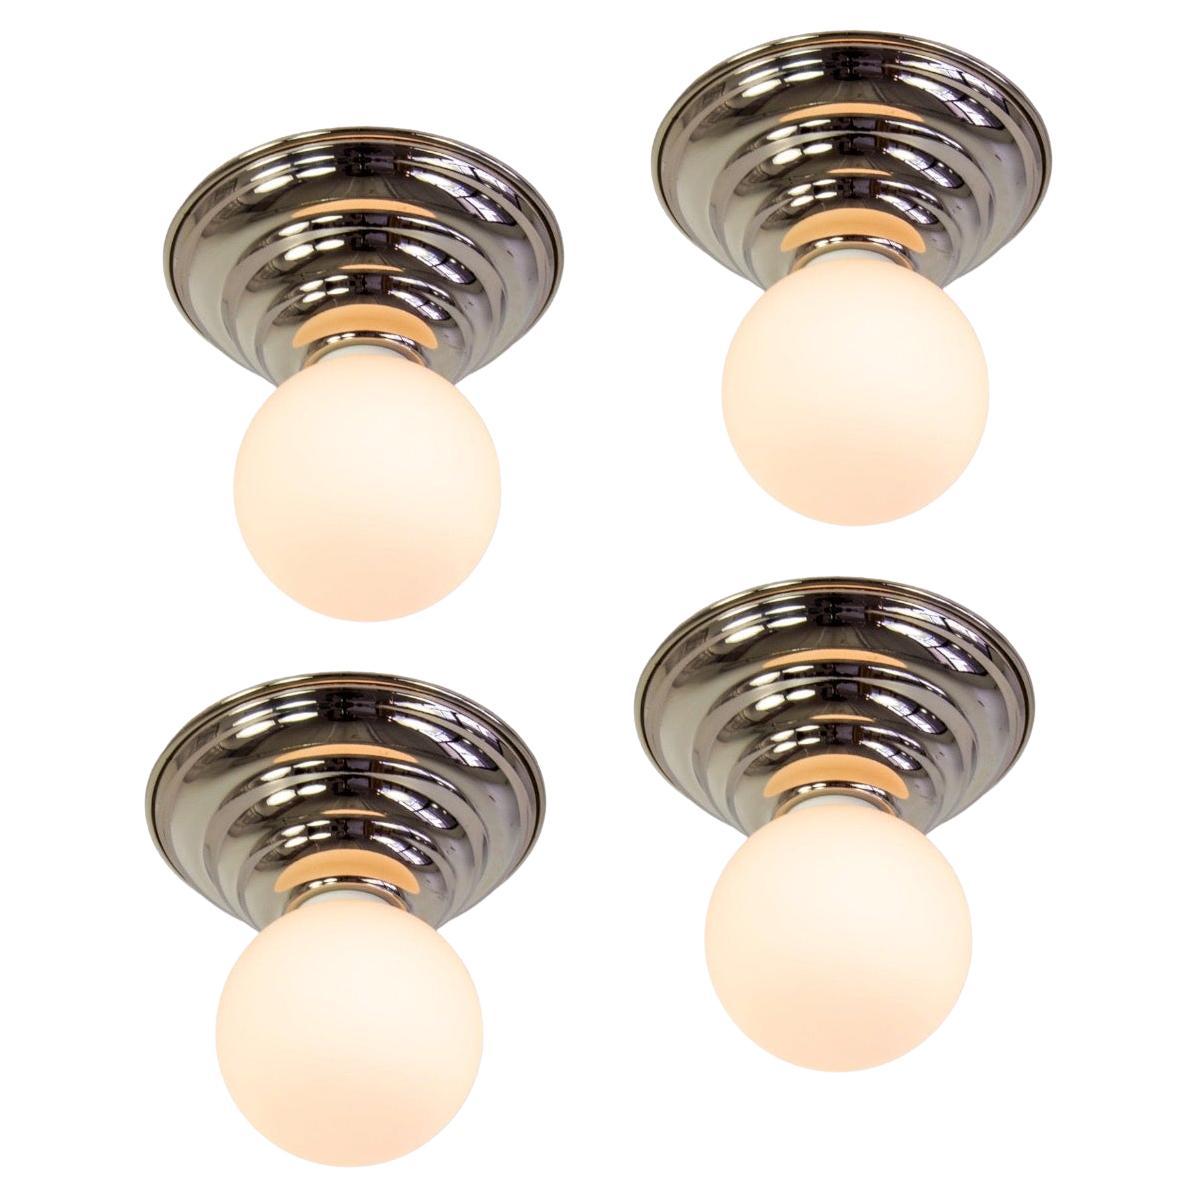 Set of 4 Hive Flush Mounts by Research.Lighting, Polished Nickel, Made to Order